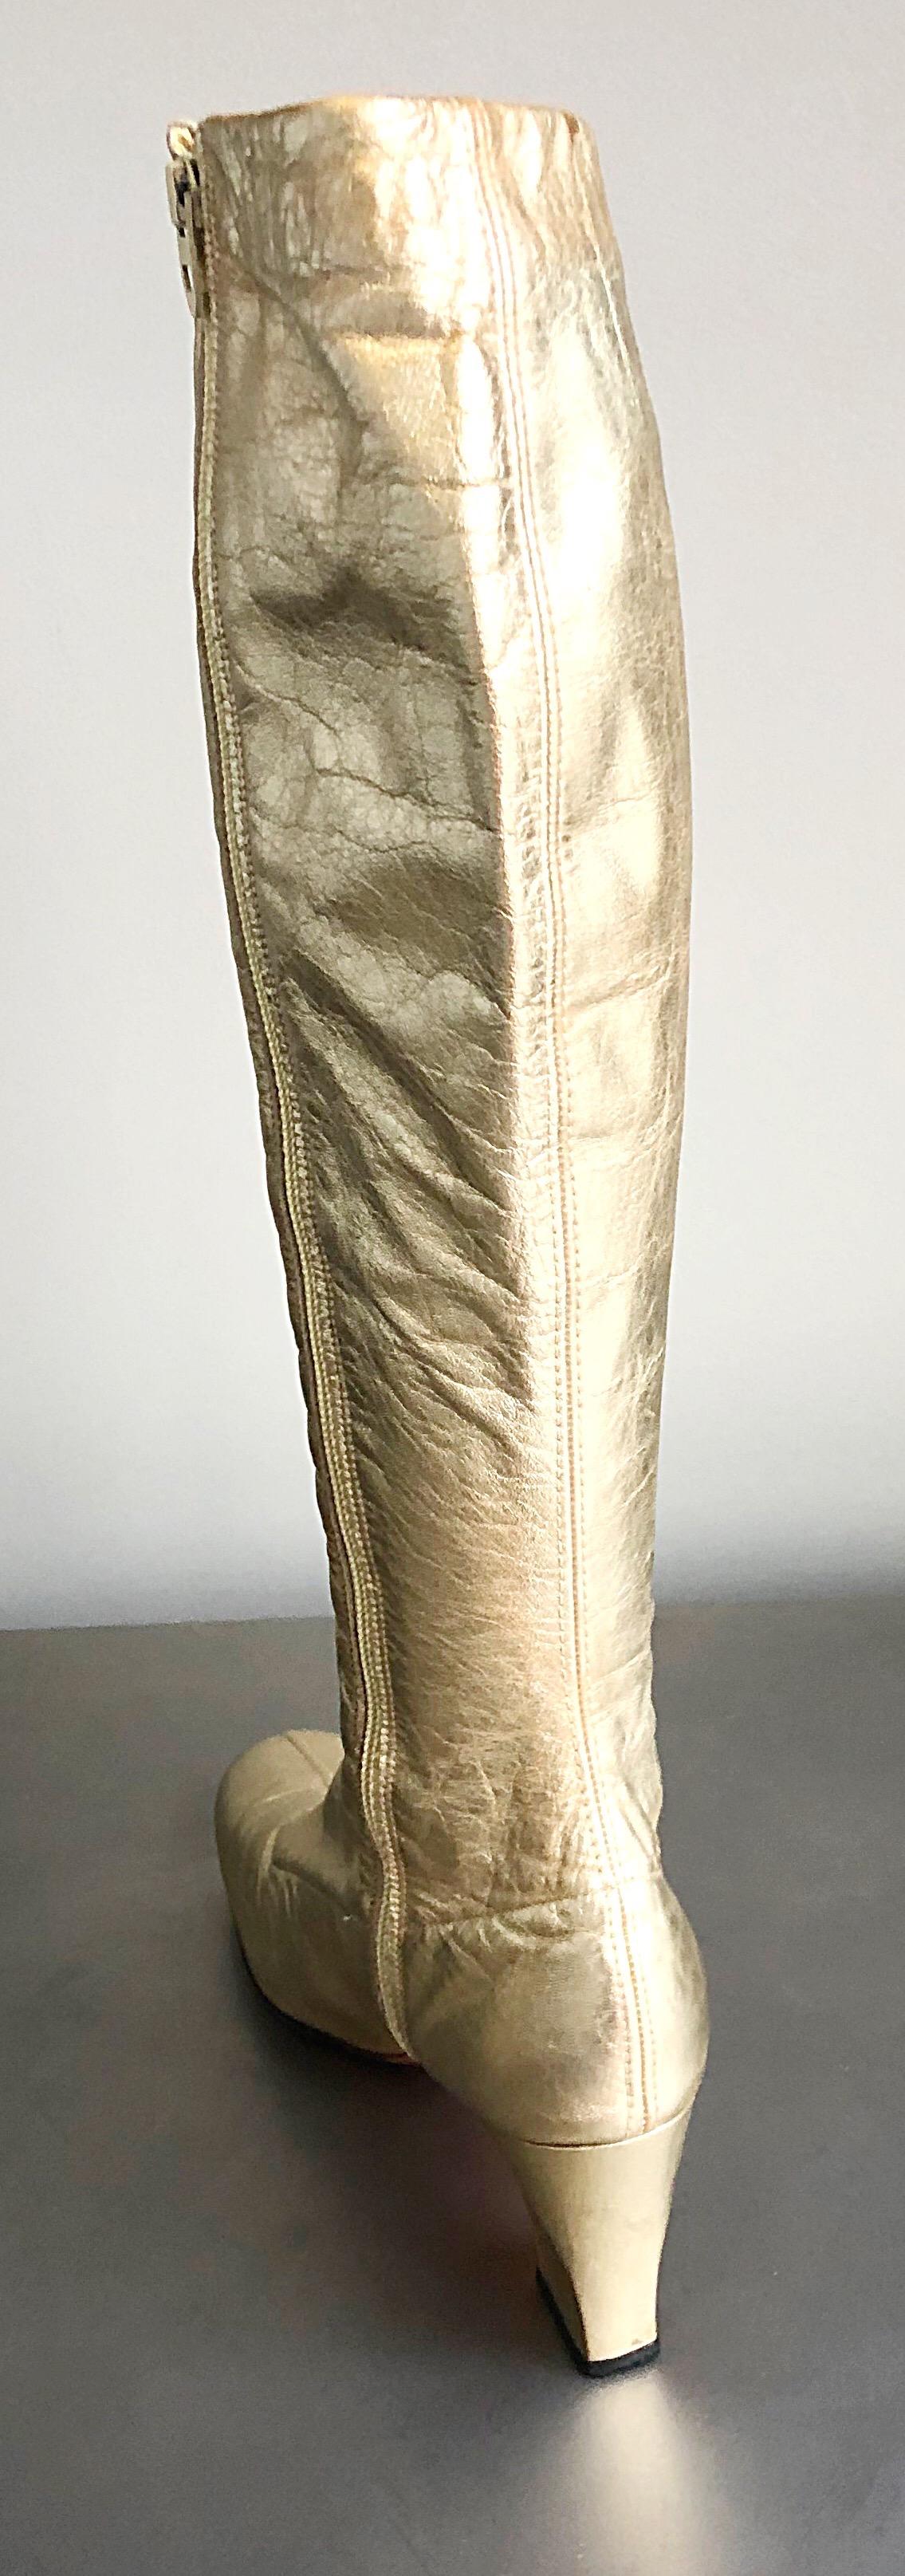 1960s Gold Leather Size 6 N Knee High Vintage 60s Mod Retro Go-Go Boots  Shoes